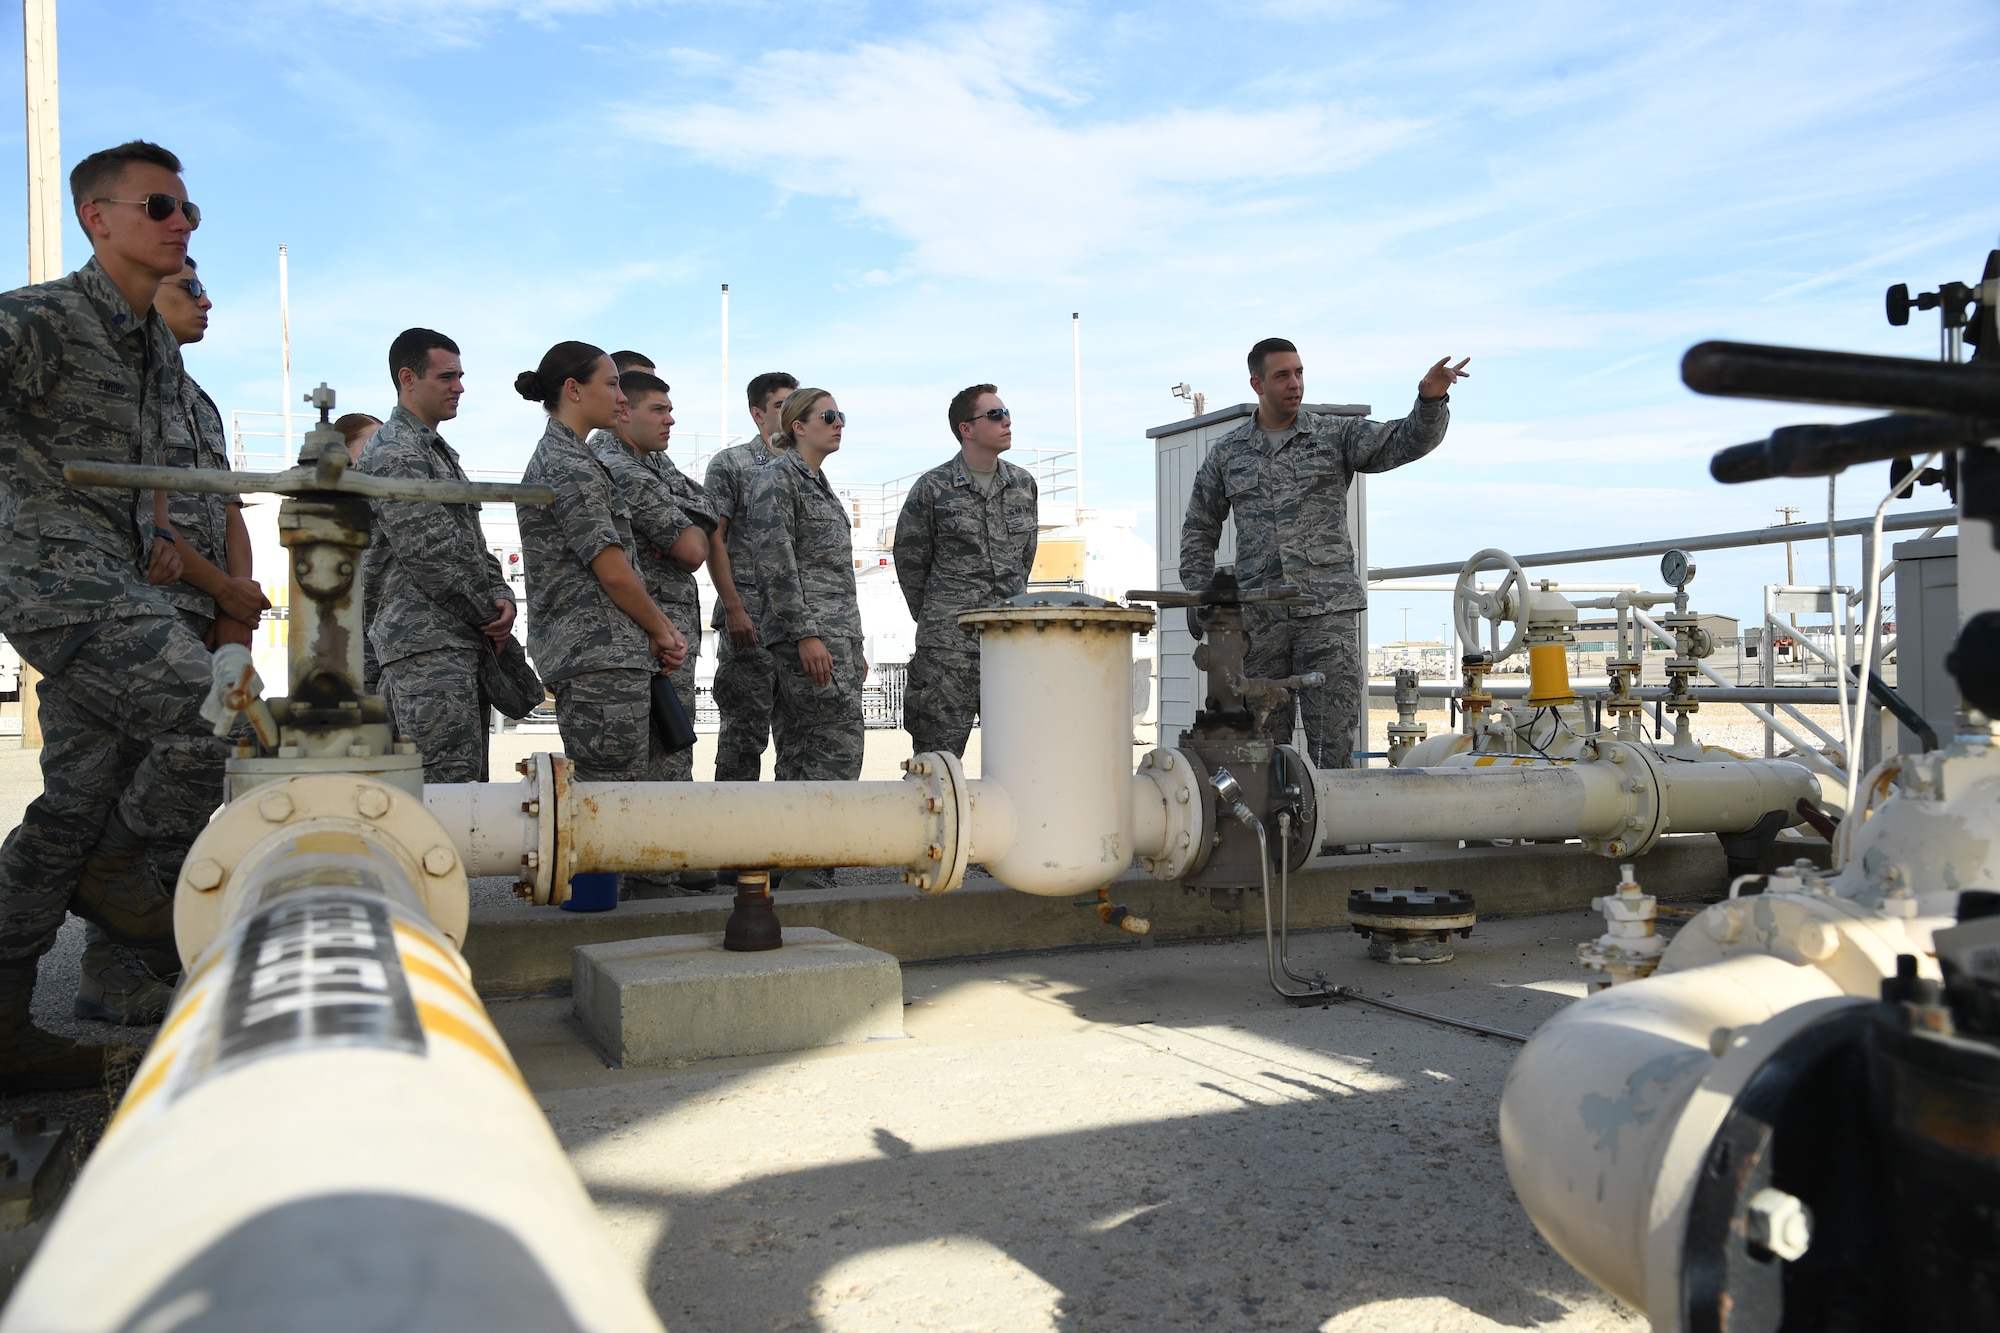 Staff Sgt. James Egger, 75th Logistics Readiness Squadron fuels technician, speaks to Air Force ROTC cadets during a tour of Hill Air Force Base, Utah, July 24, 2019. Over 80 cadets visited Hill as part of a professional development training program called Operation Air Force. The program gives cadets a greater understanding of the Air Force while introducing them to a variety of careers fields. (U.S. Air Force photo by R. Nial Bradshaw)